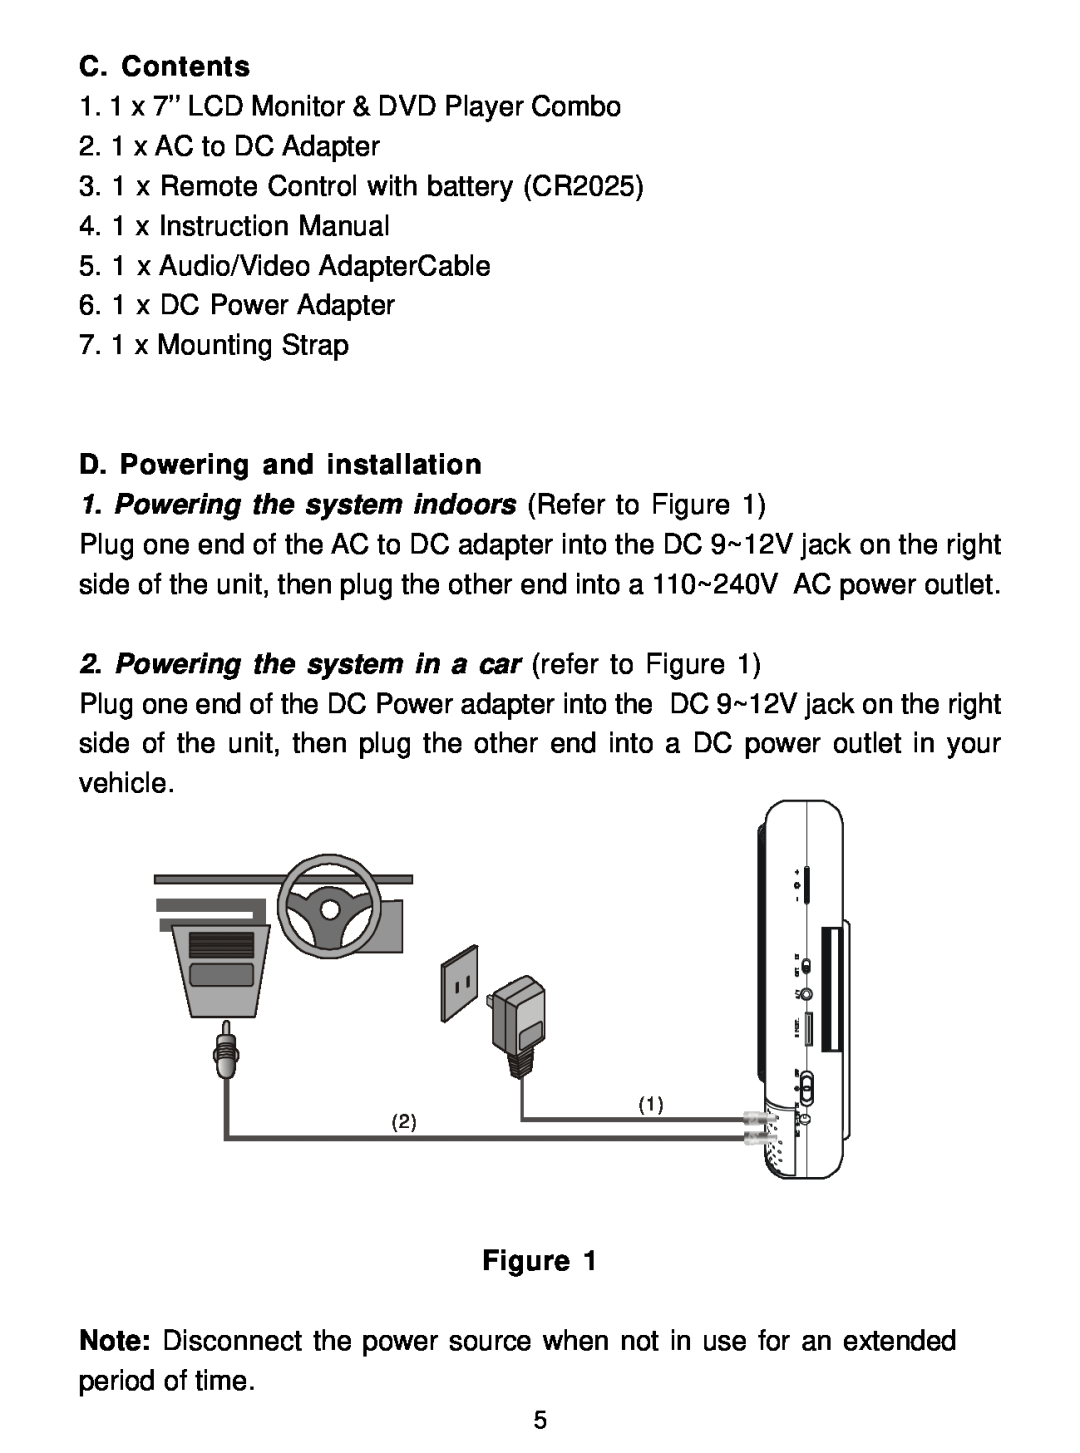 Audiovox D1726 manual C. Contents, D. Powering and installation, Powering the system indoors Refer to Figure 